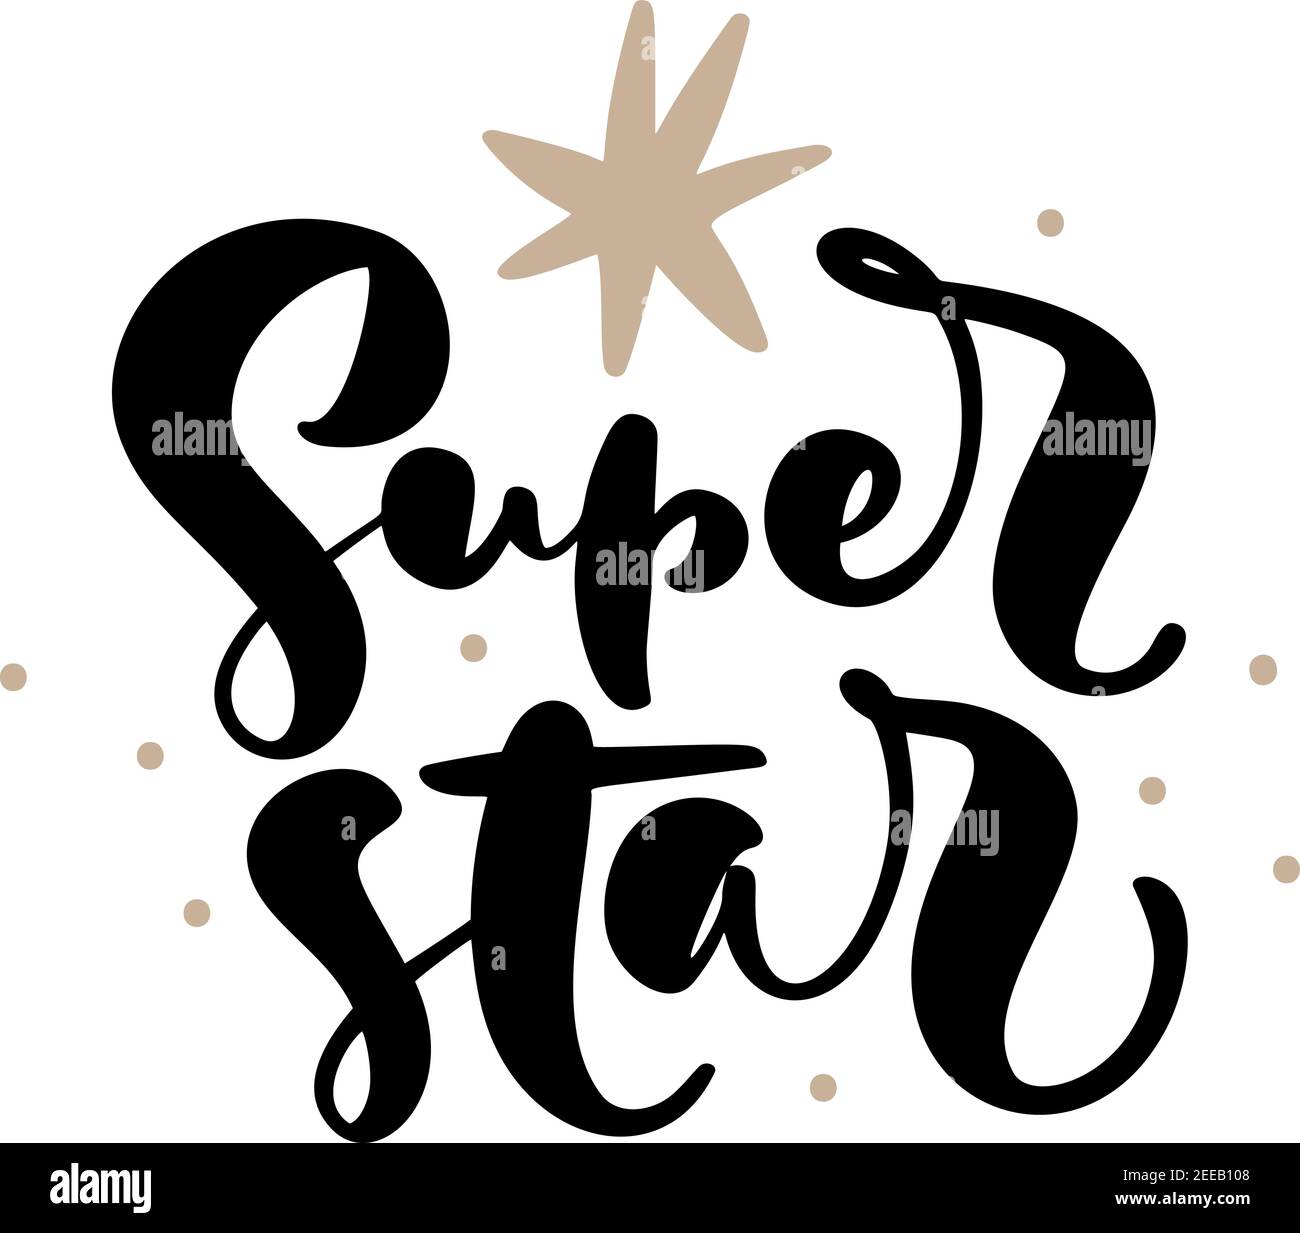 1,795 Super Star Quote Images, Stock Photos, 3D objects, & Vectors